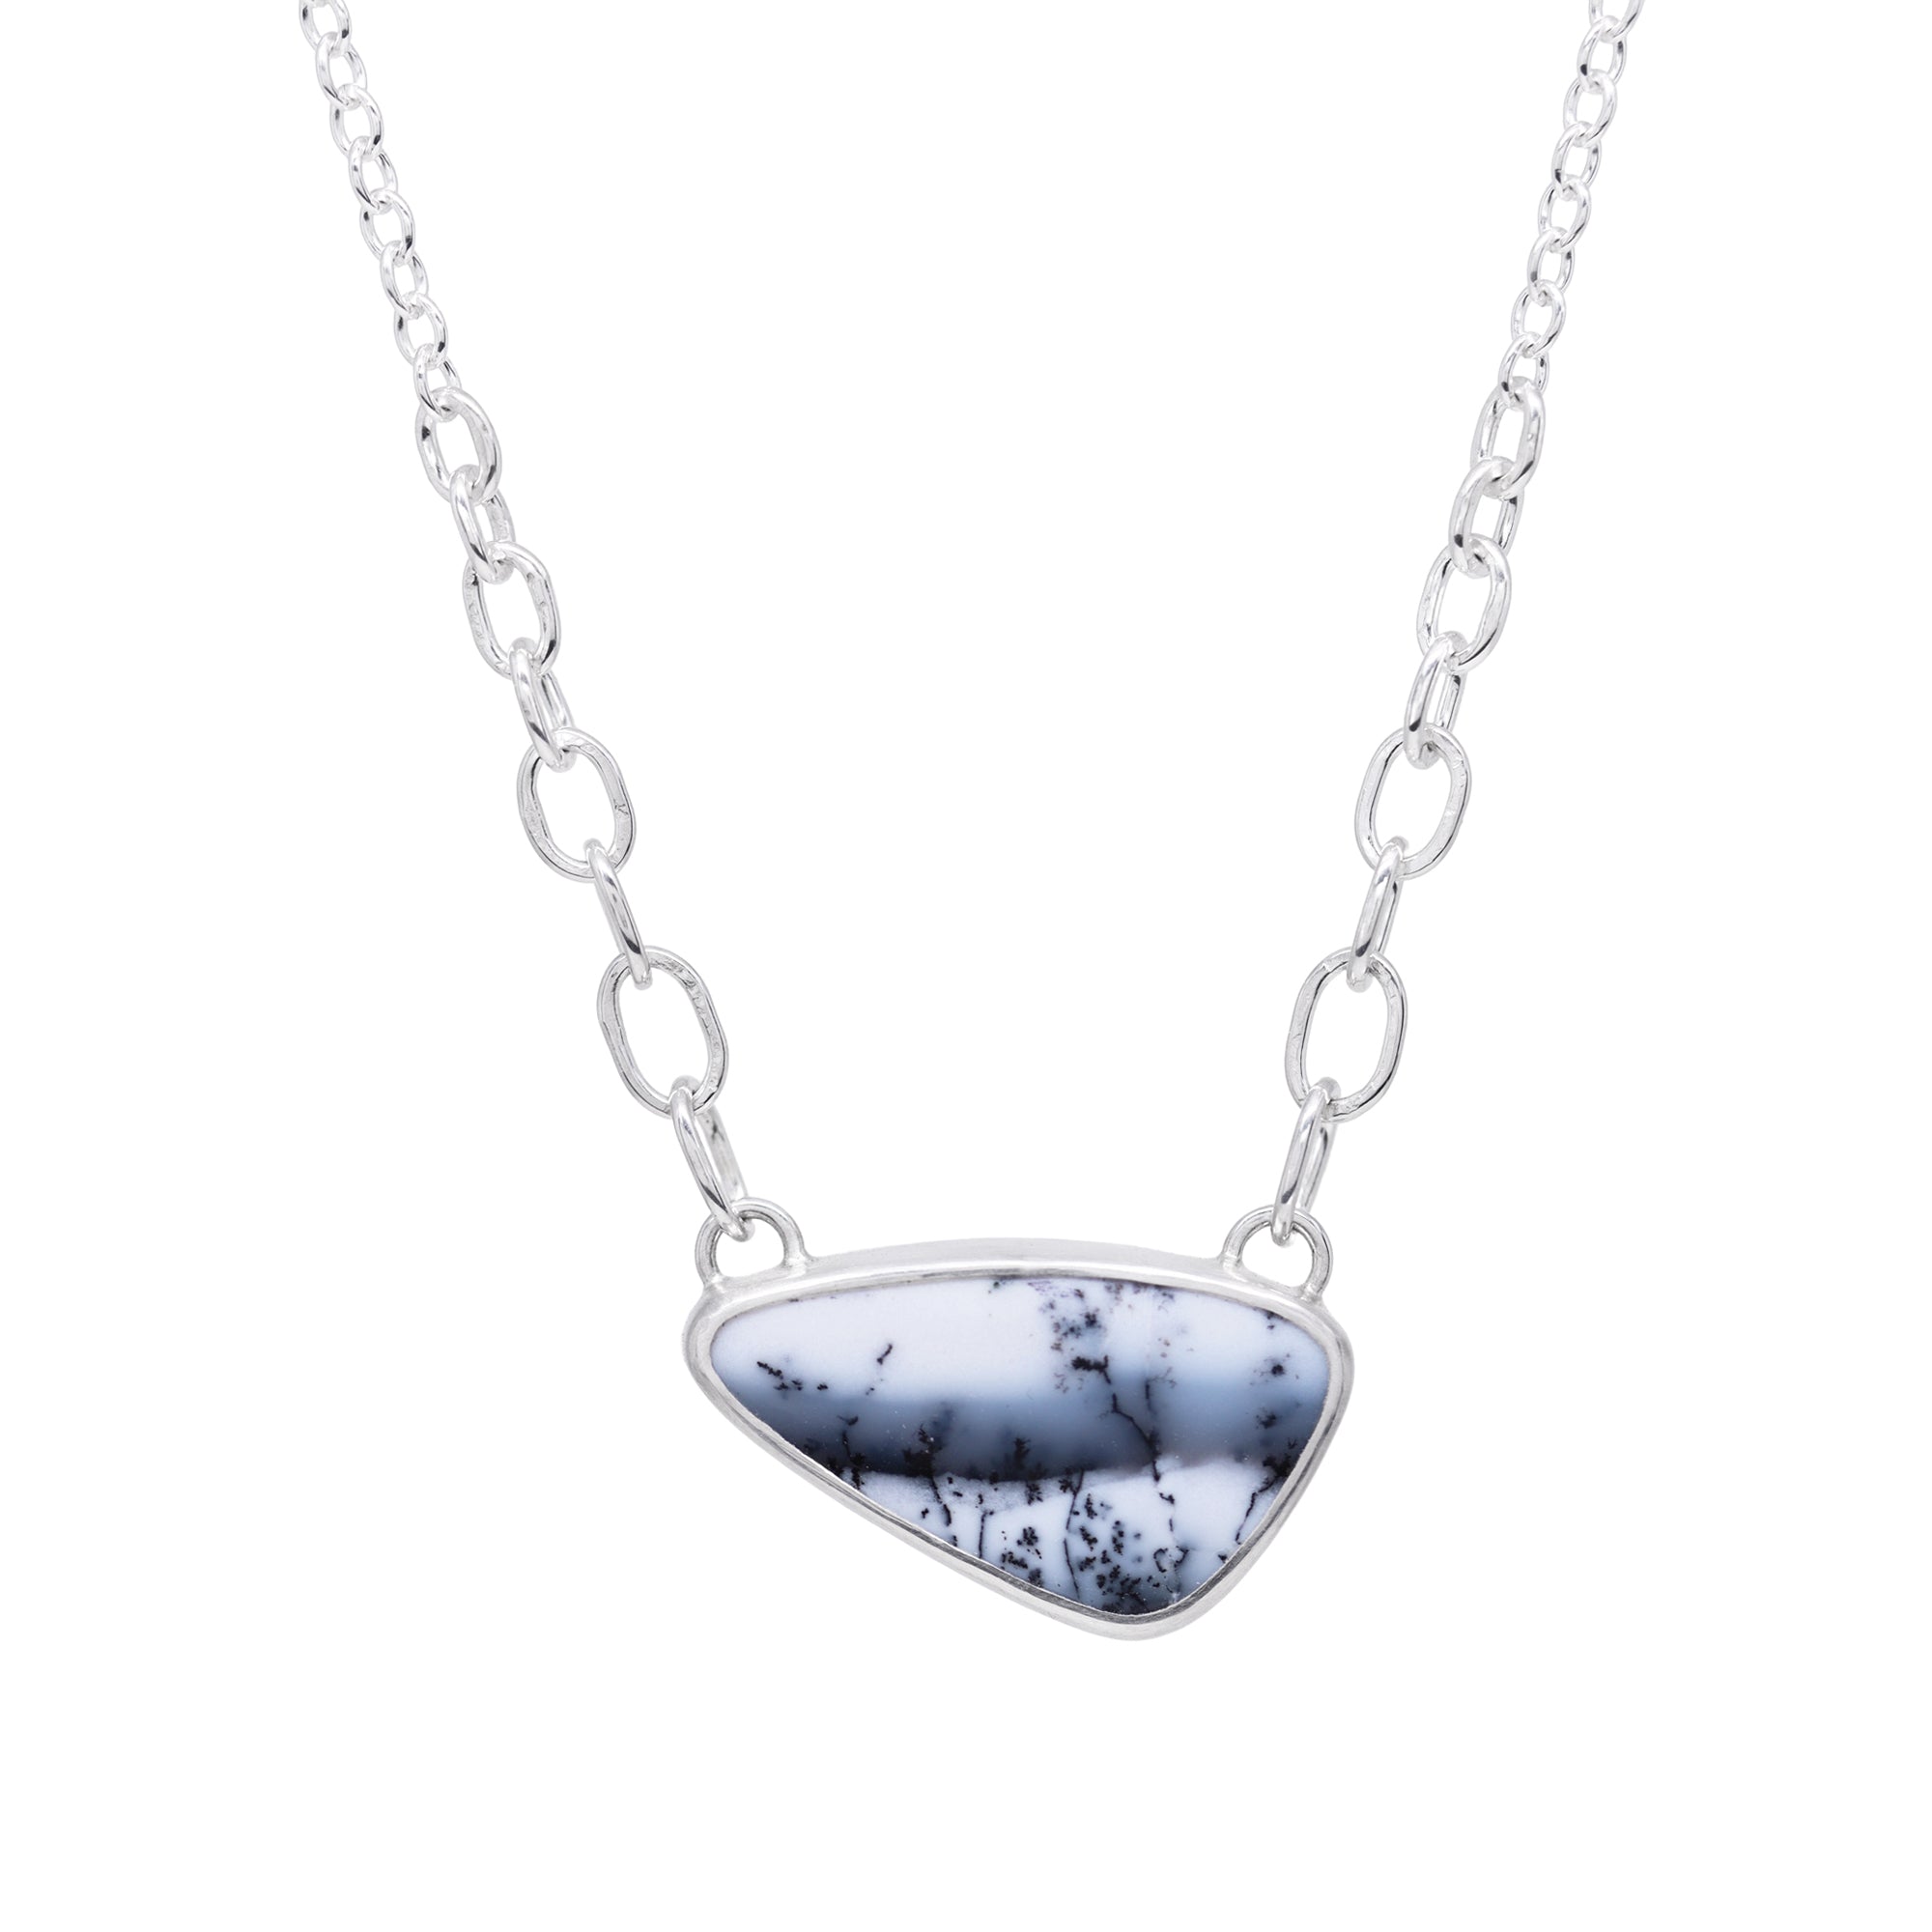 Balance Link Necklace - Dendritic Agate - Bright Sterling